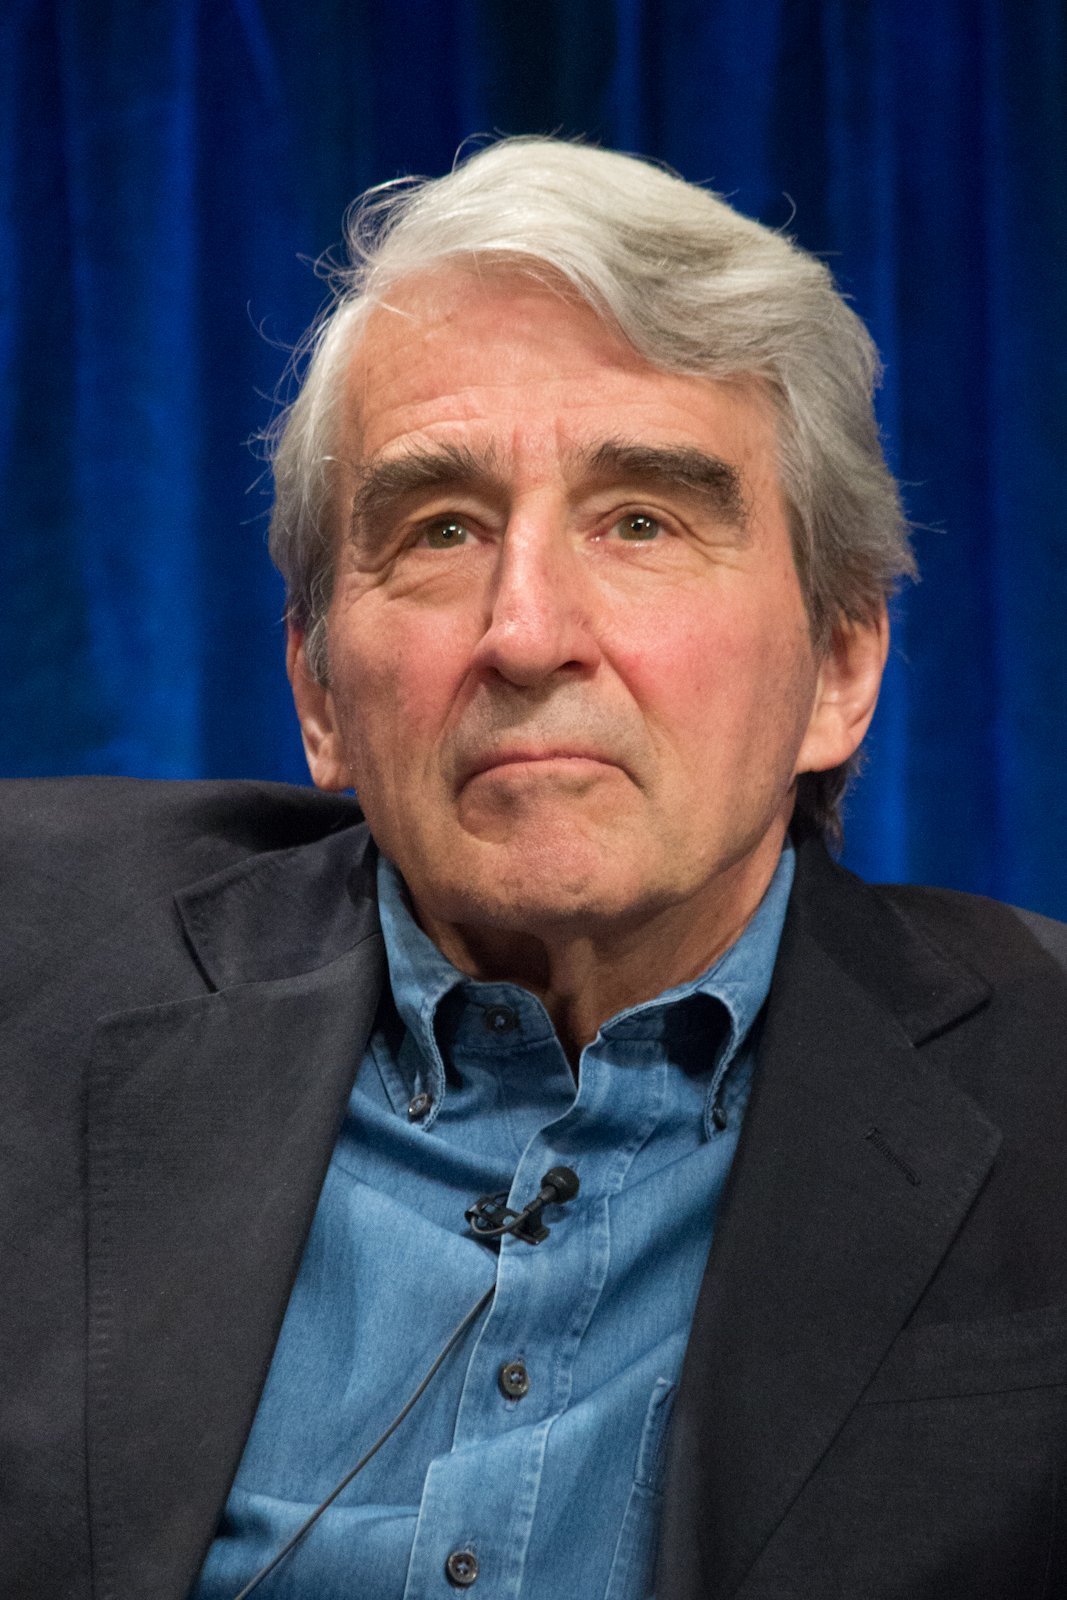 Sam Waterston at the PaleyFest 2013 panel on the TV show "The Newsroom." | Photo: Wikimedia Commons